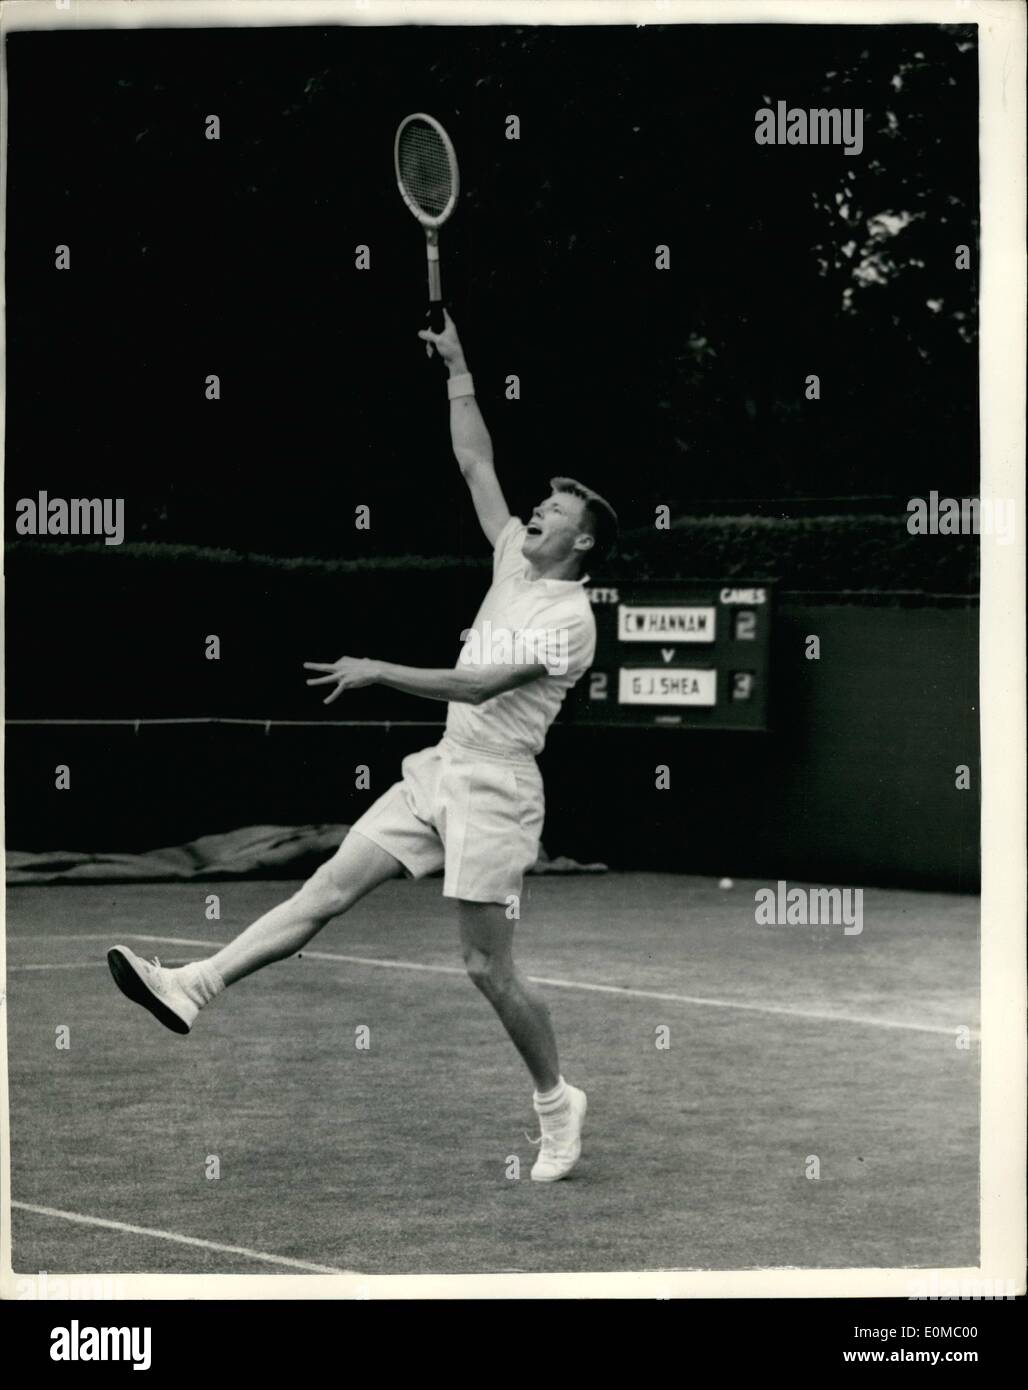 Jun. 06, 1954 - Wimbledon-First Day Shea (USA) V Hannam (GB) G.J. Shea, the newcomer from USA, in play against C.W. Hannam (Great Britain) during their match at Wimbledon today. Stock Photo